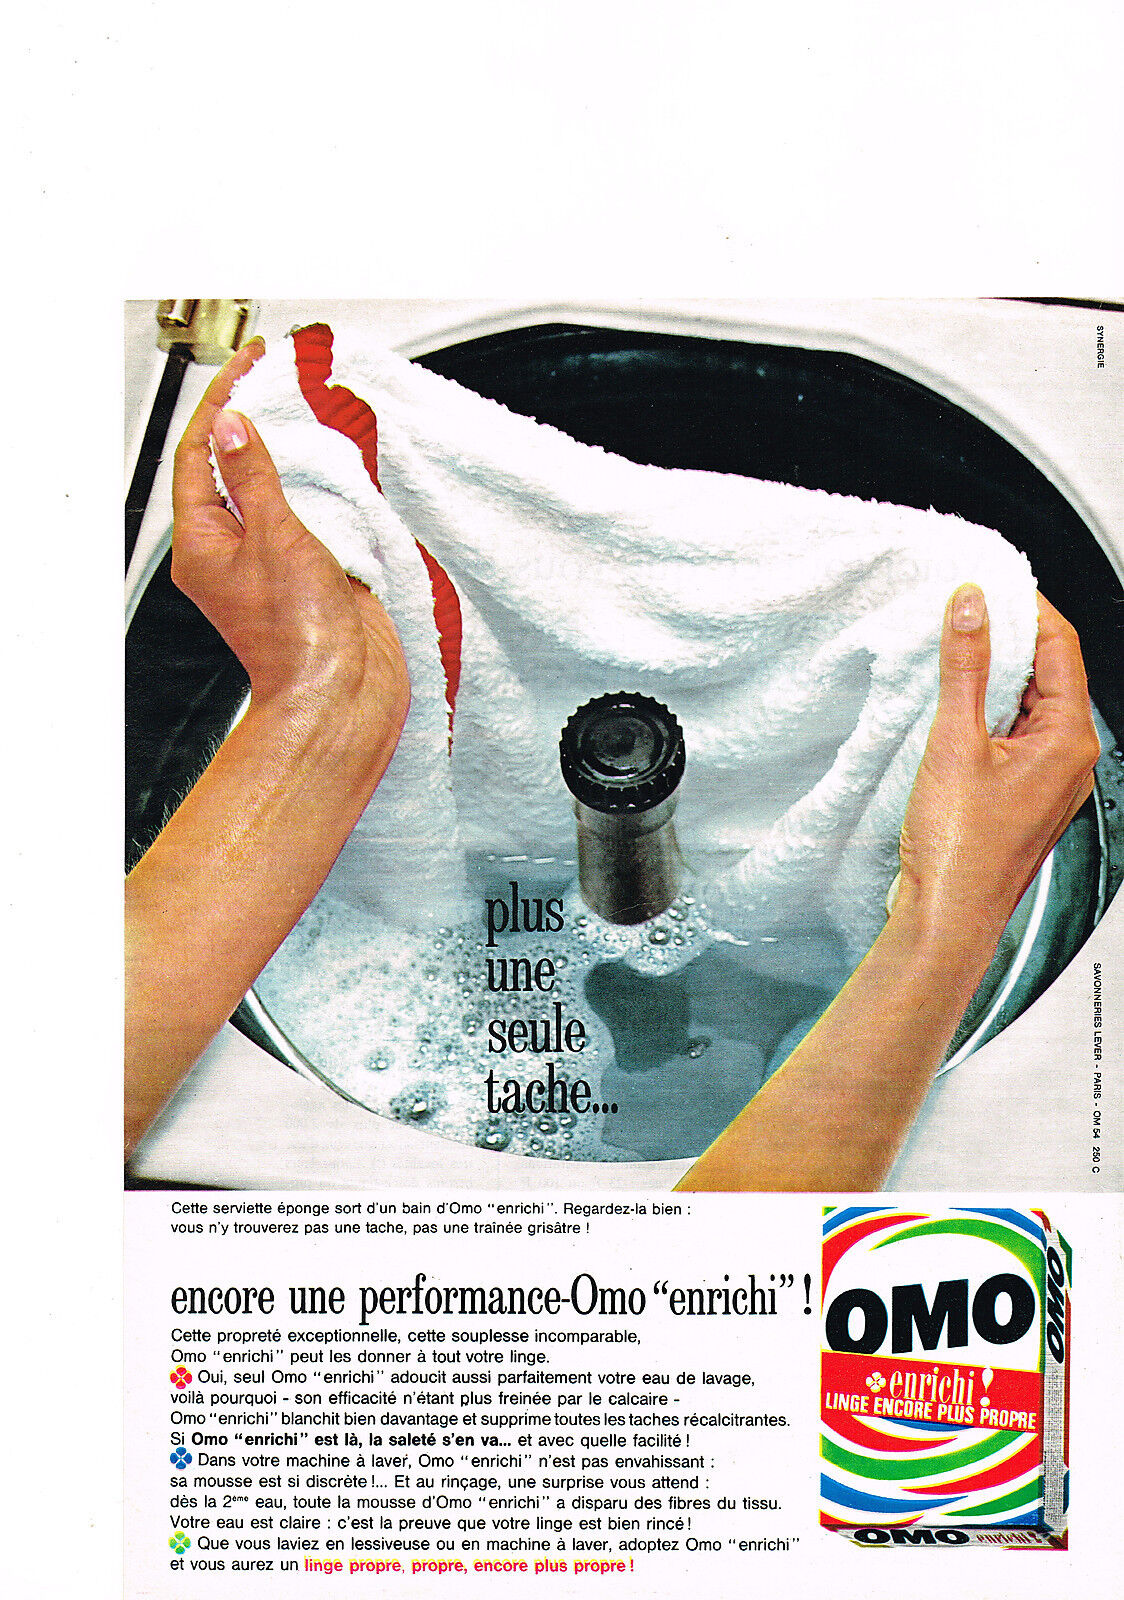 1963 ADVERTISING ADVERTISEMENT OMO ENRICHED laundry powder